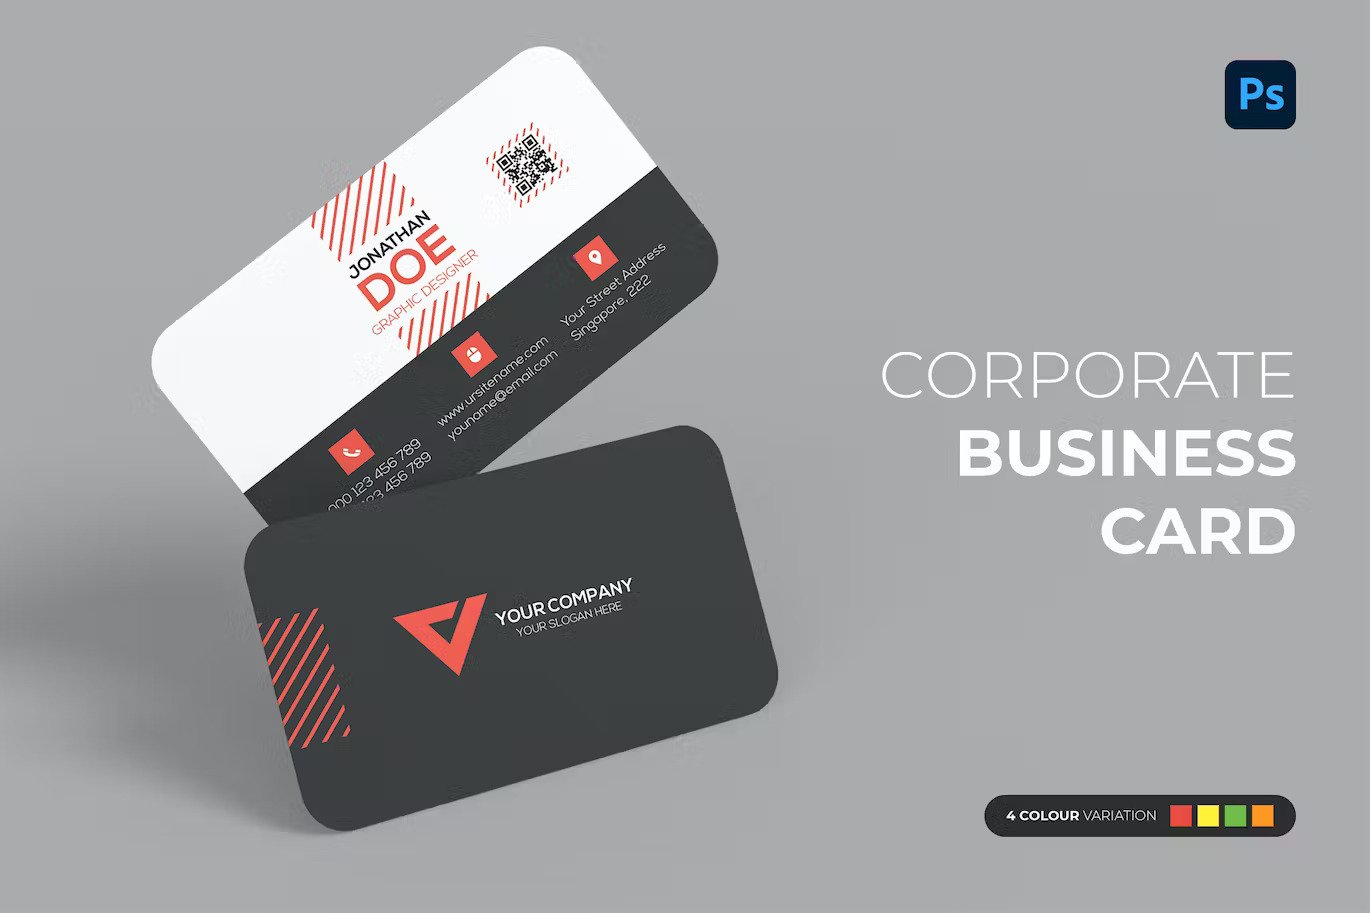 A corporate business card template in different colors